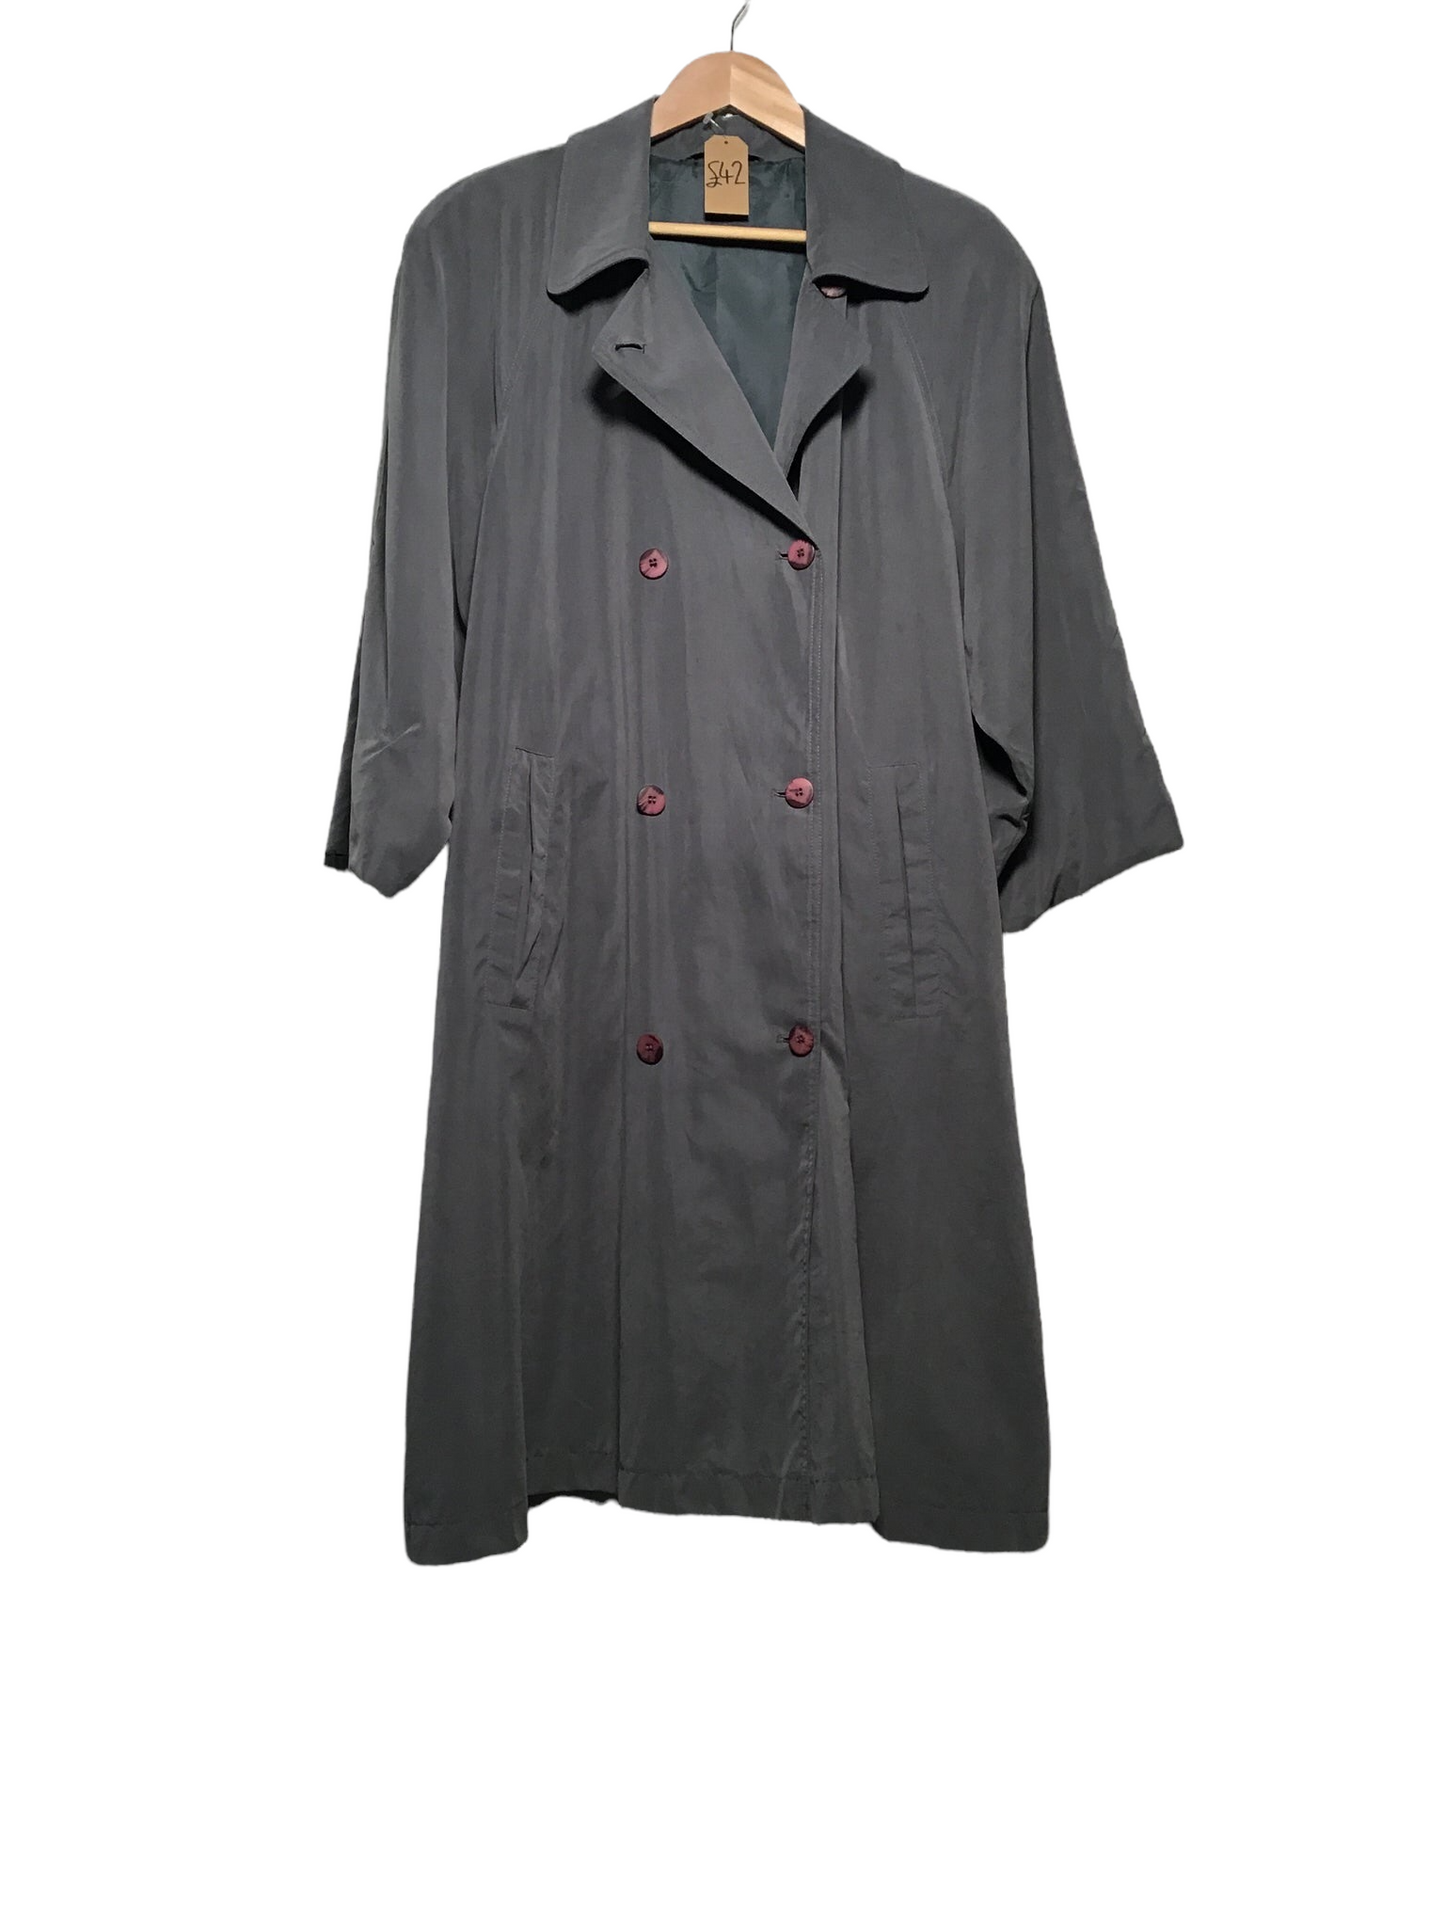 Belted Trench Coat (Size L)